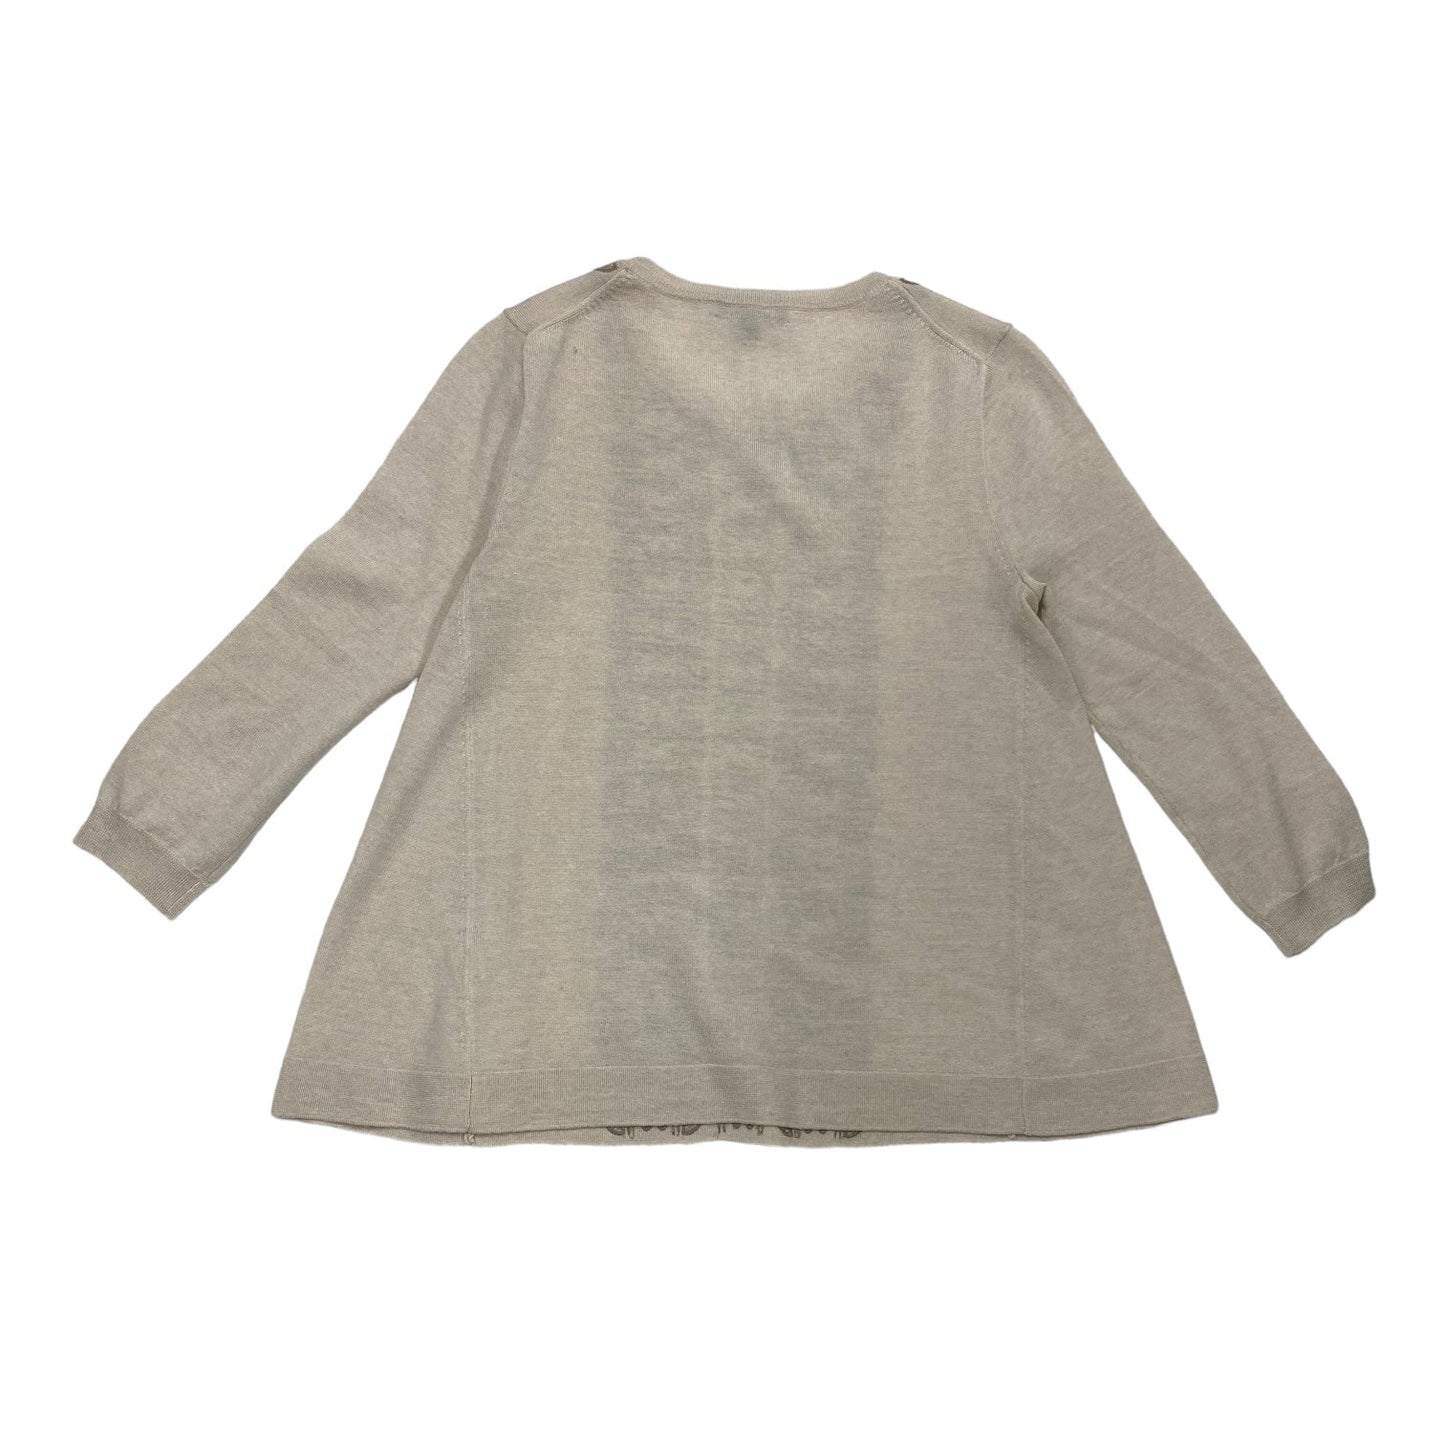 Taupe Sweater J. Crew, Size Xs